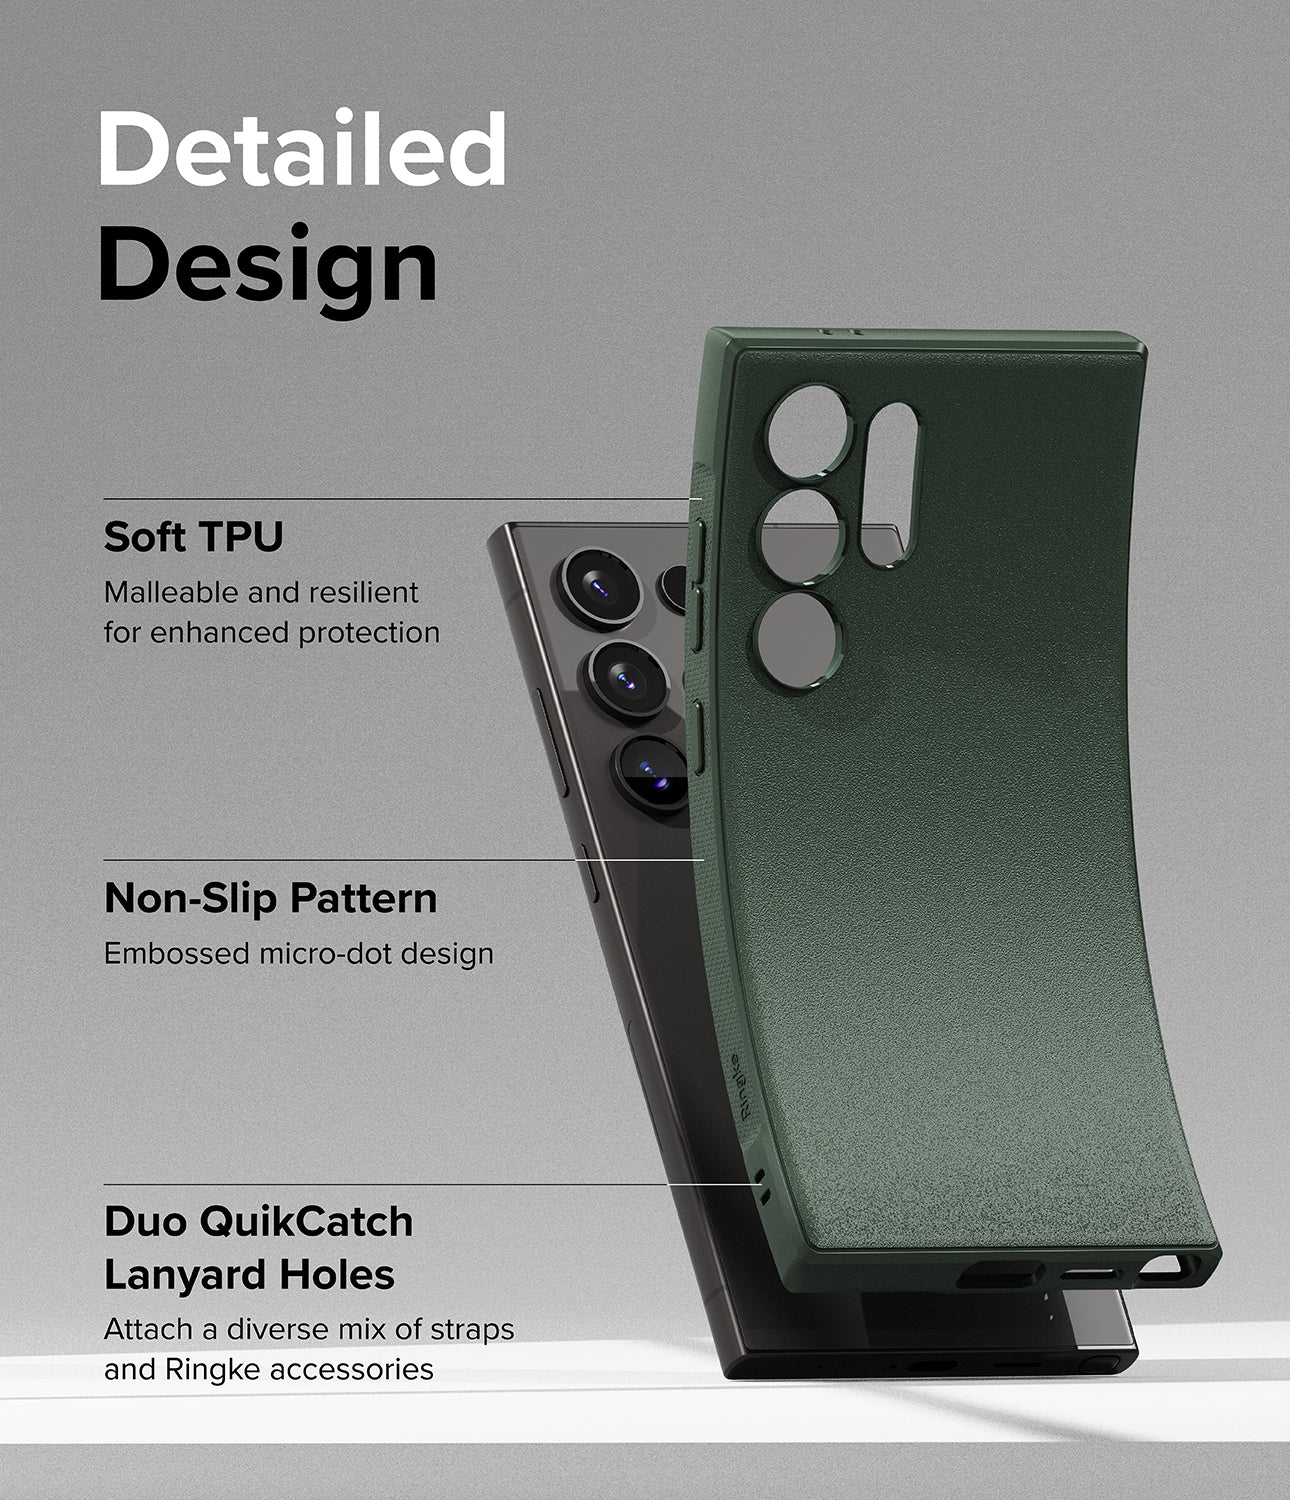 Galaxy S24 Ultra Case | Onyx - Dark Green - Detailed Design. Malleable and resilient for enhanced protection with Soft TPU. Embossed micro-dot design with Non-slip Pattern. Attach a diverse mix of straps and Ringke accessories.